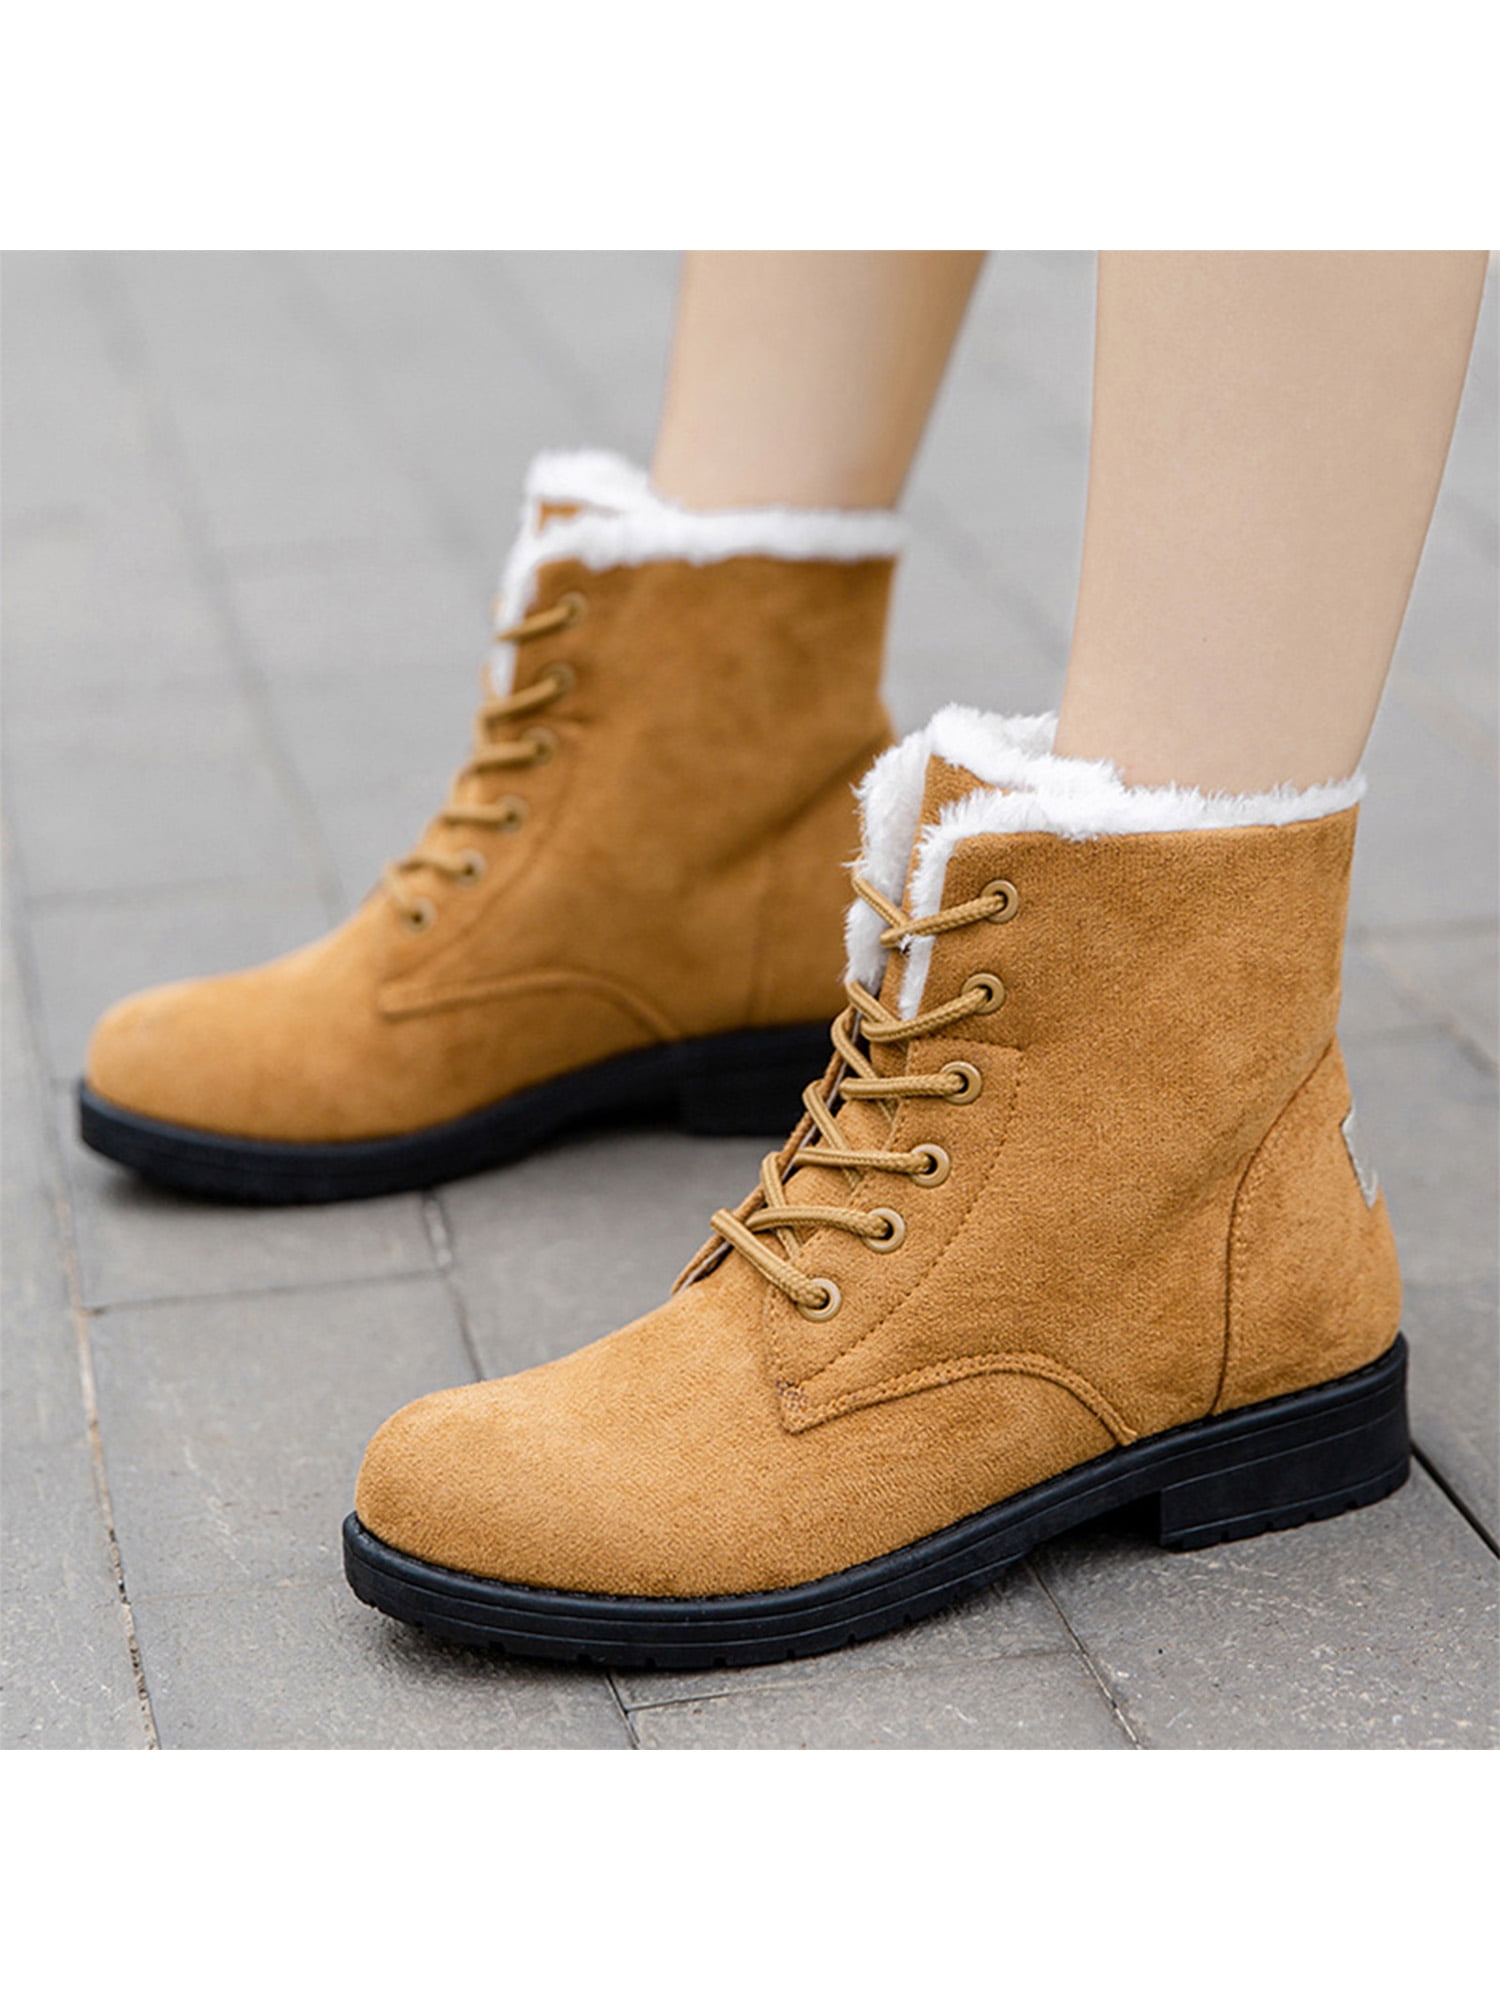 NEW WOMENS LADIES FUR LINED FLAT LACE UP WINTER SNOW ANKLE BOOTS CASUAL SIZE 